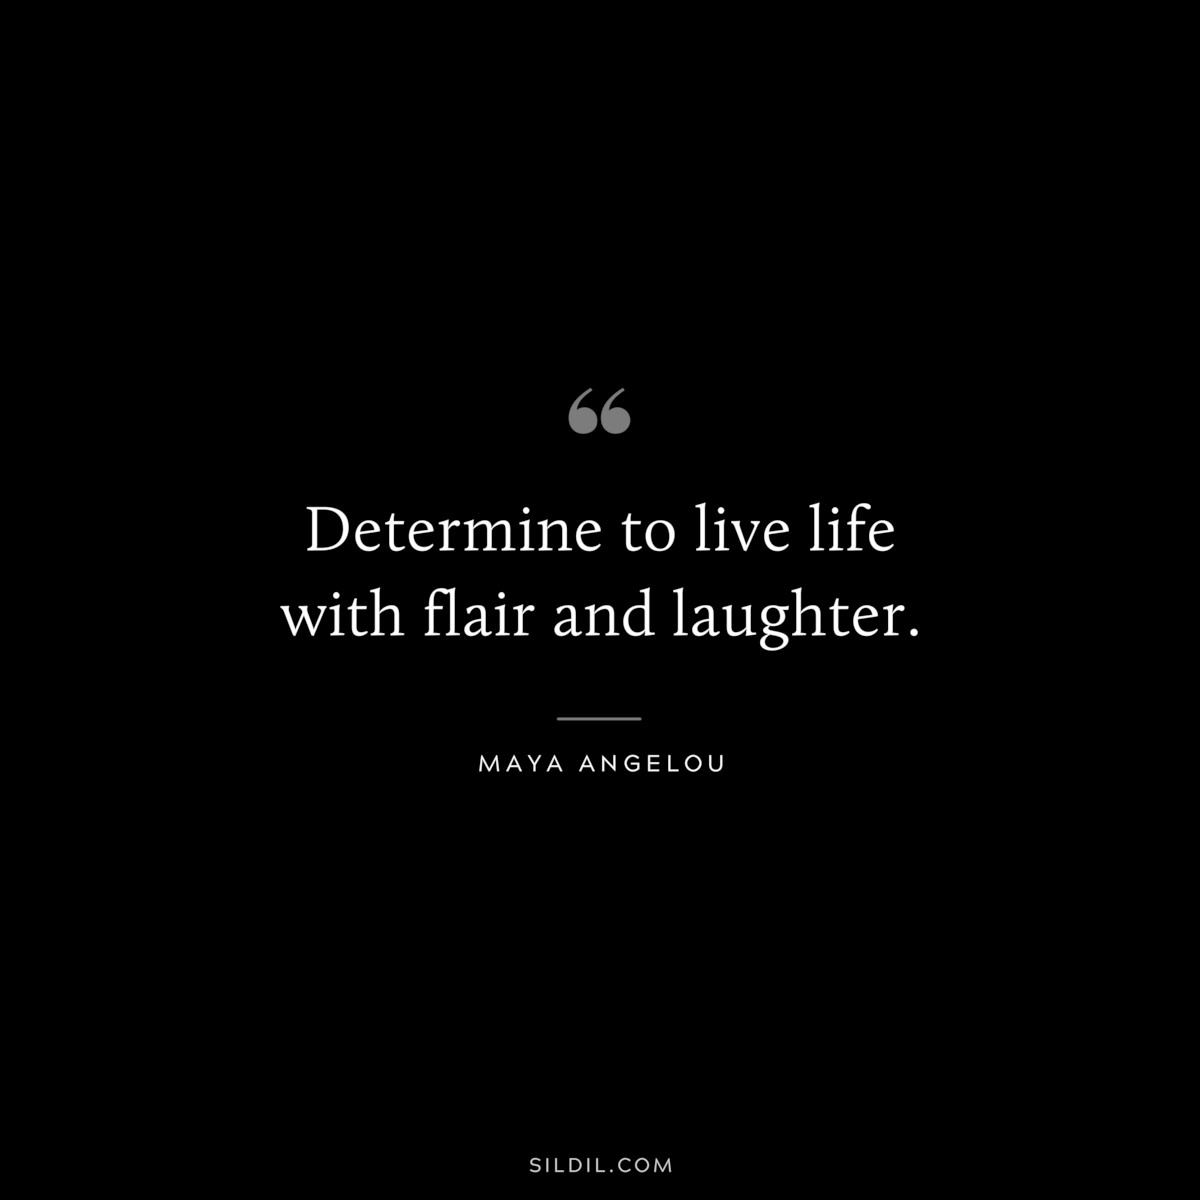 Determine to live life with flair and laughter. ― Maya Angelou